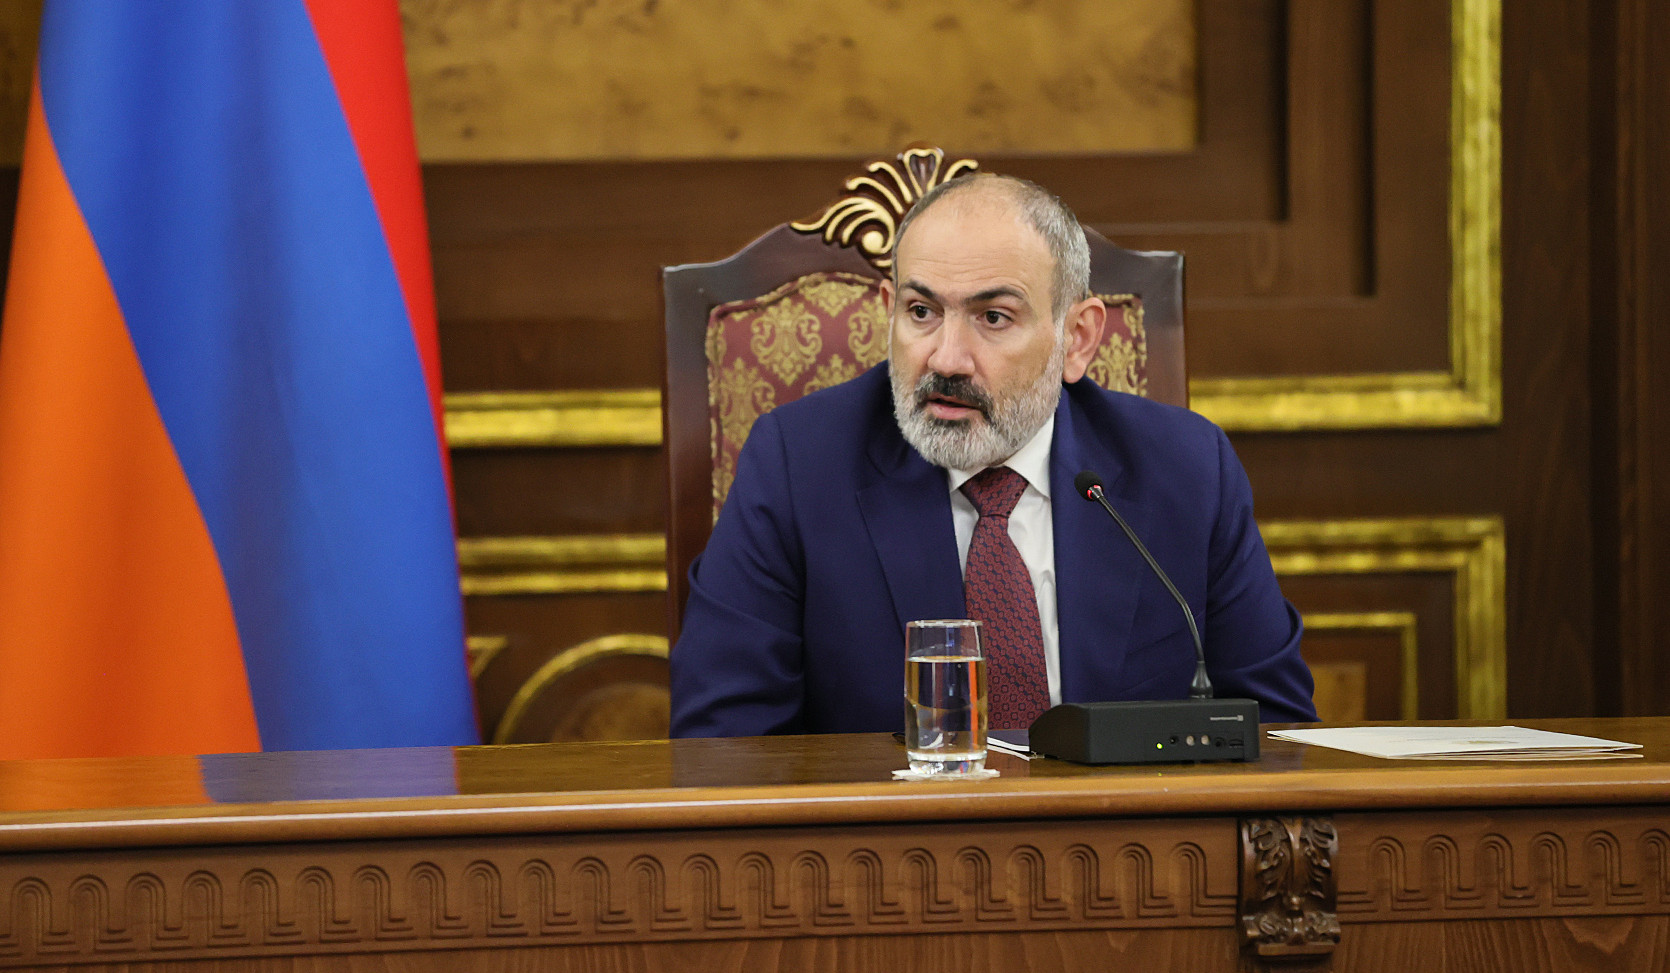 Armenia continues to be in a state of high economic activeness, Nikol Pashinyan